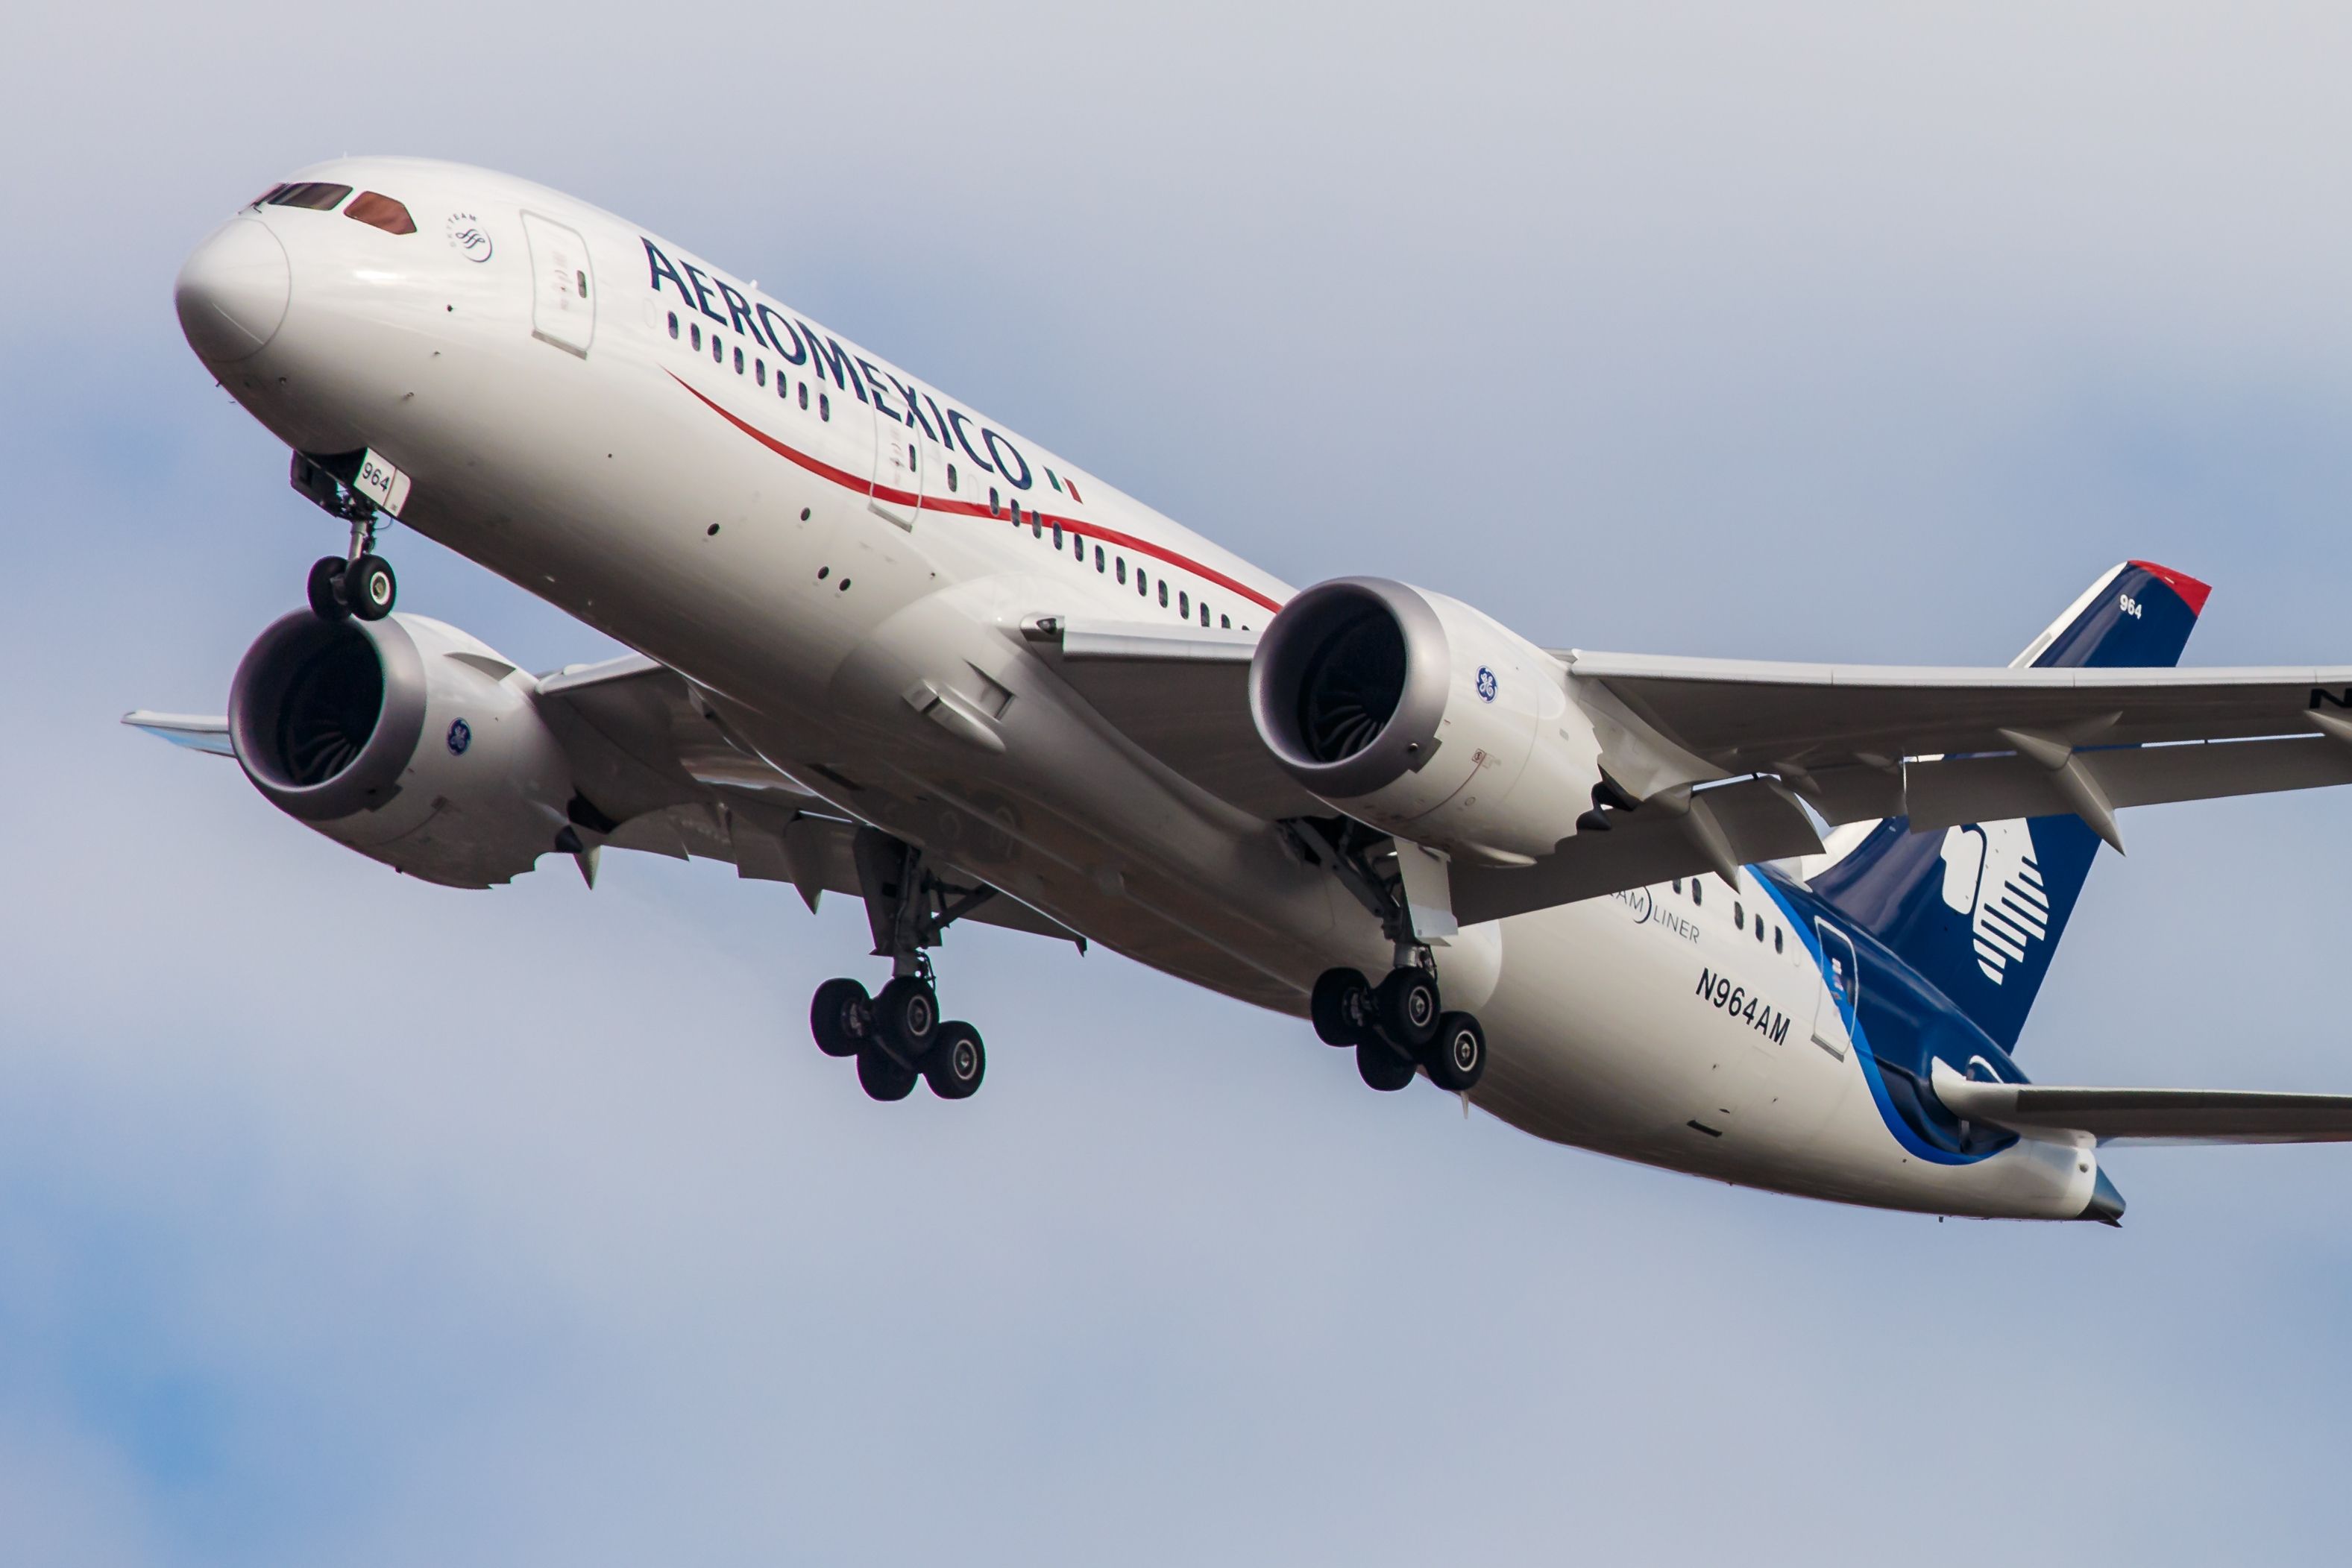 An Aeromexico Boeing 787 Dreamliner